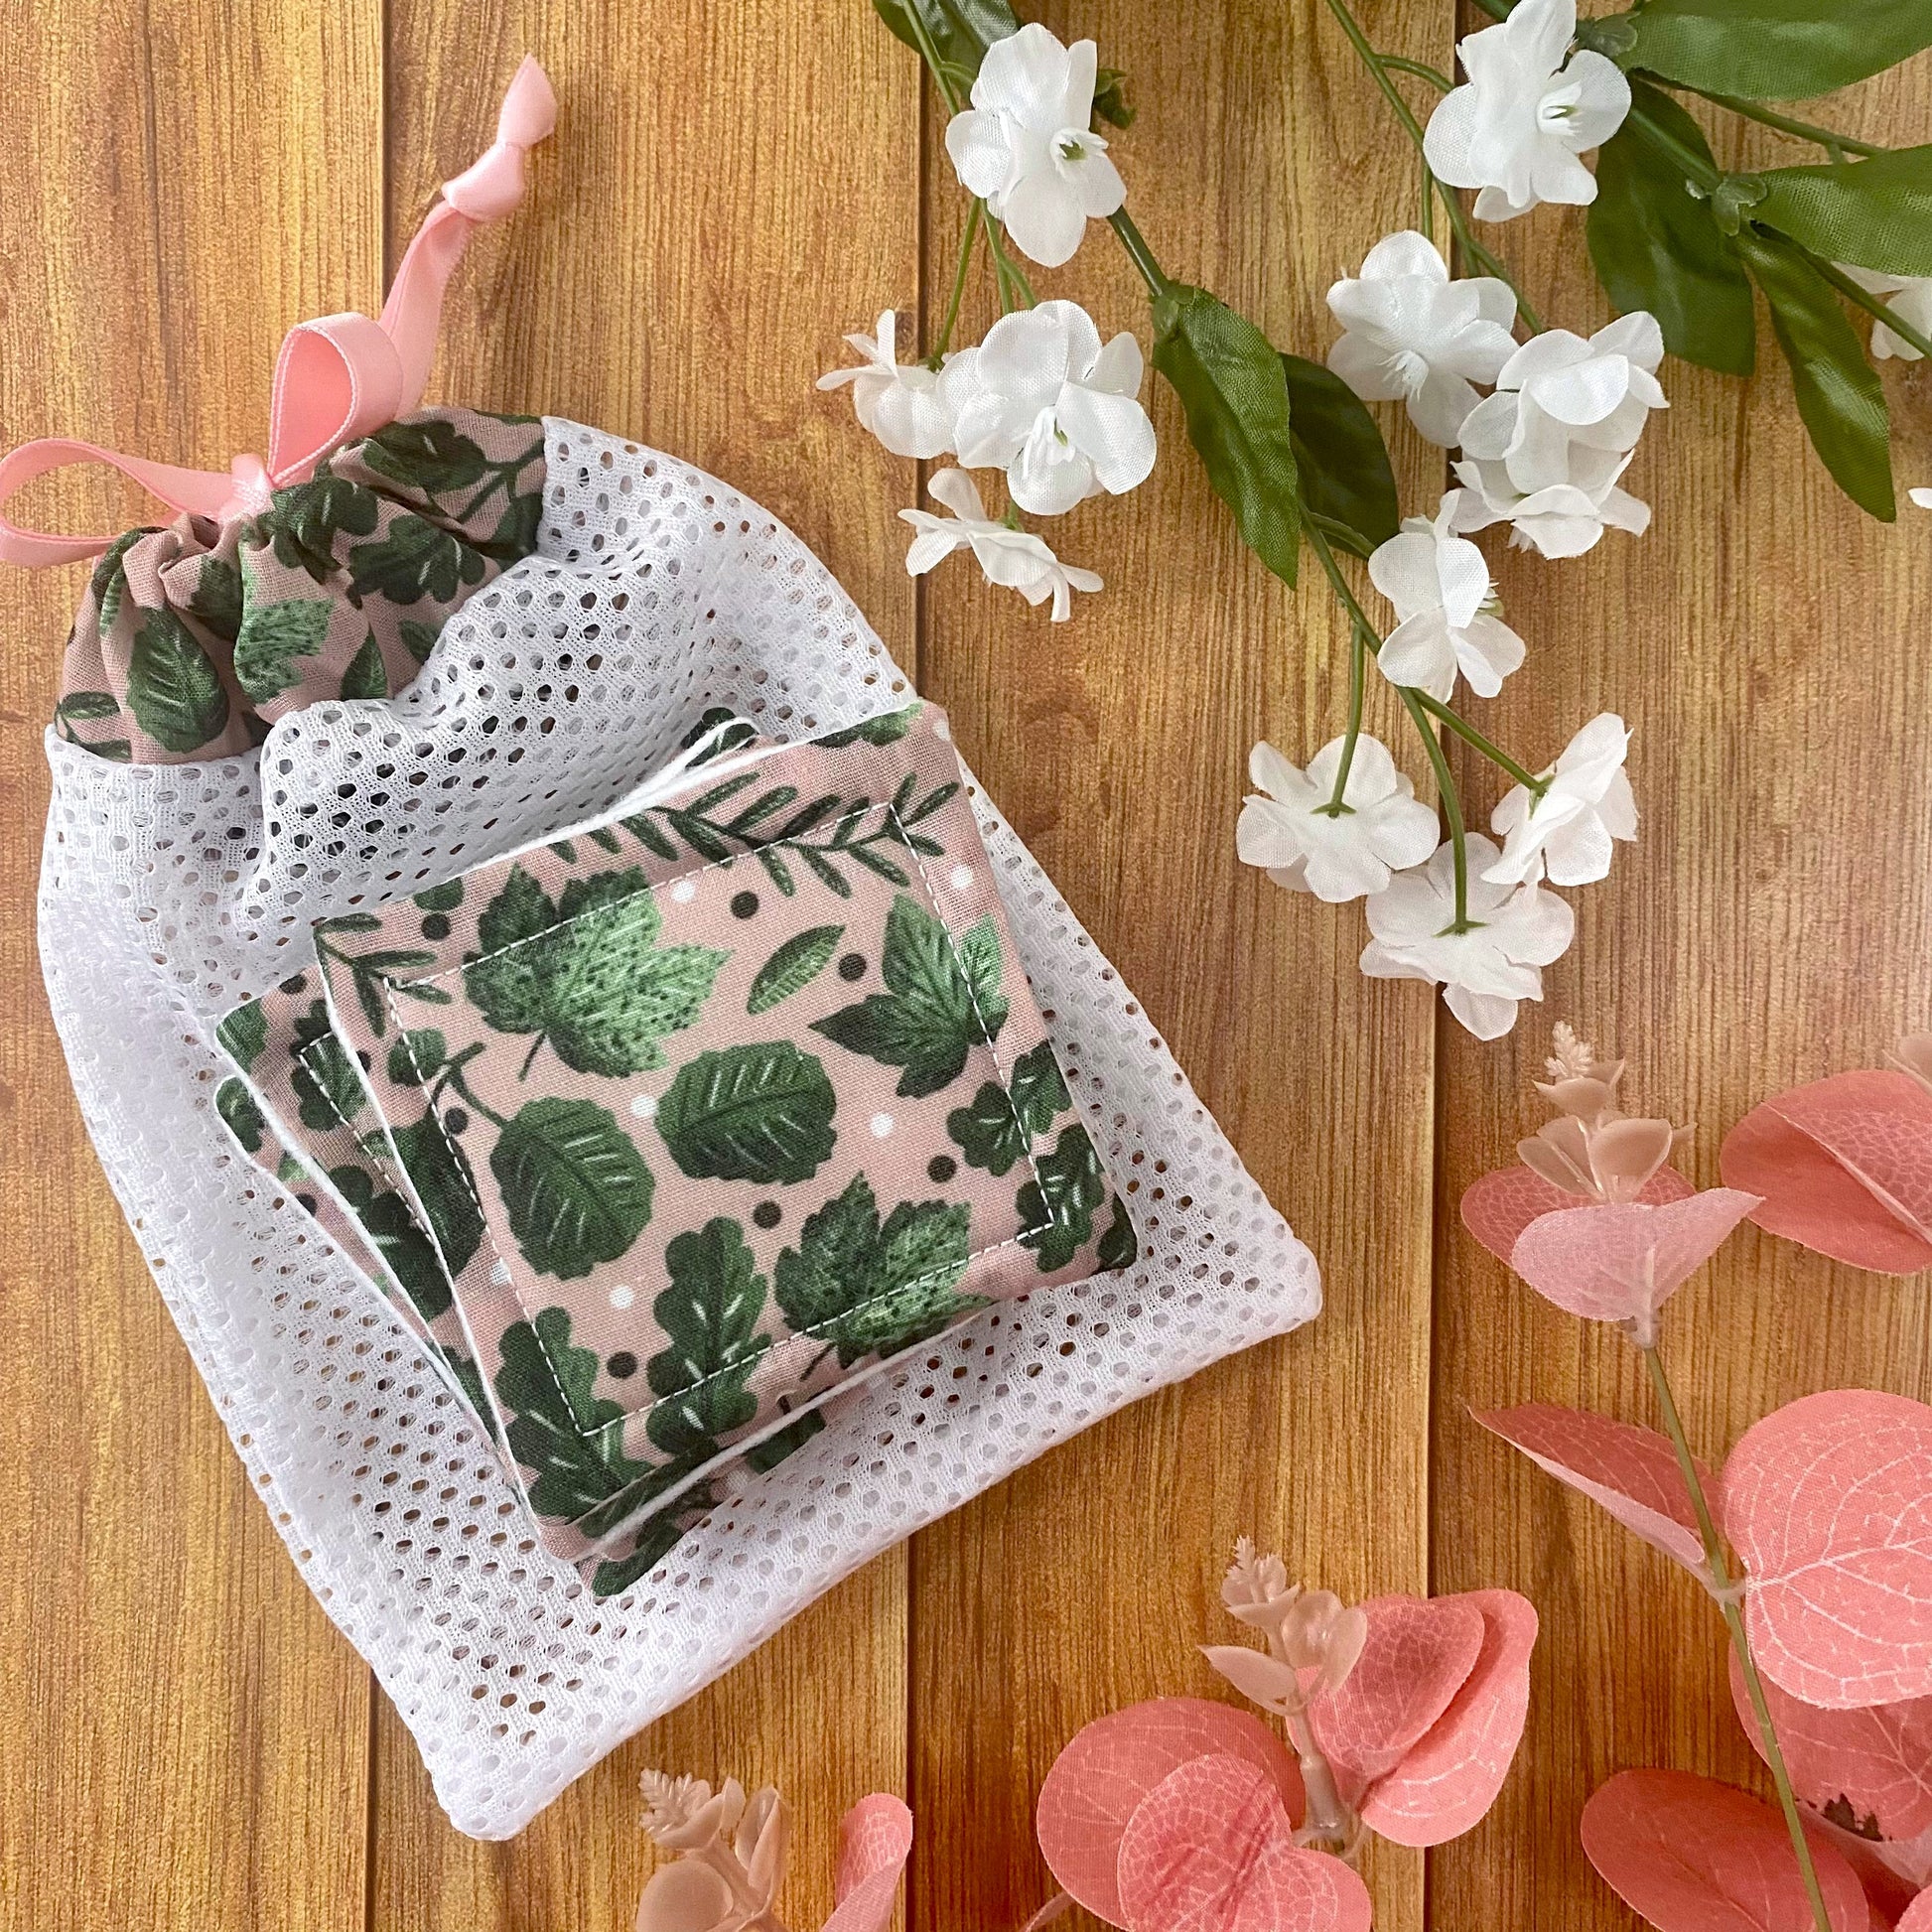 photograph of reusable skincare pads and washbag giftset on a wooden backdrop with foliage around it